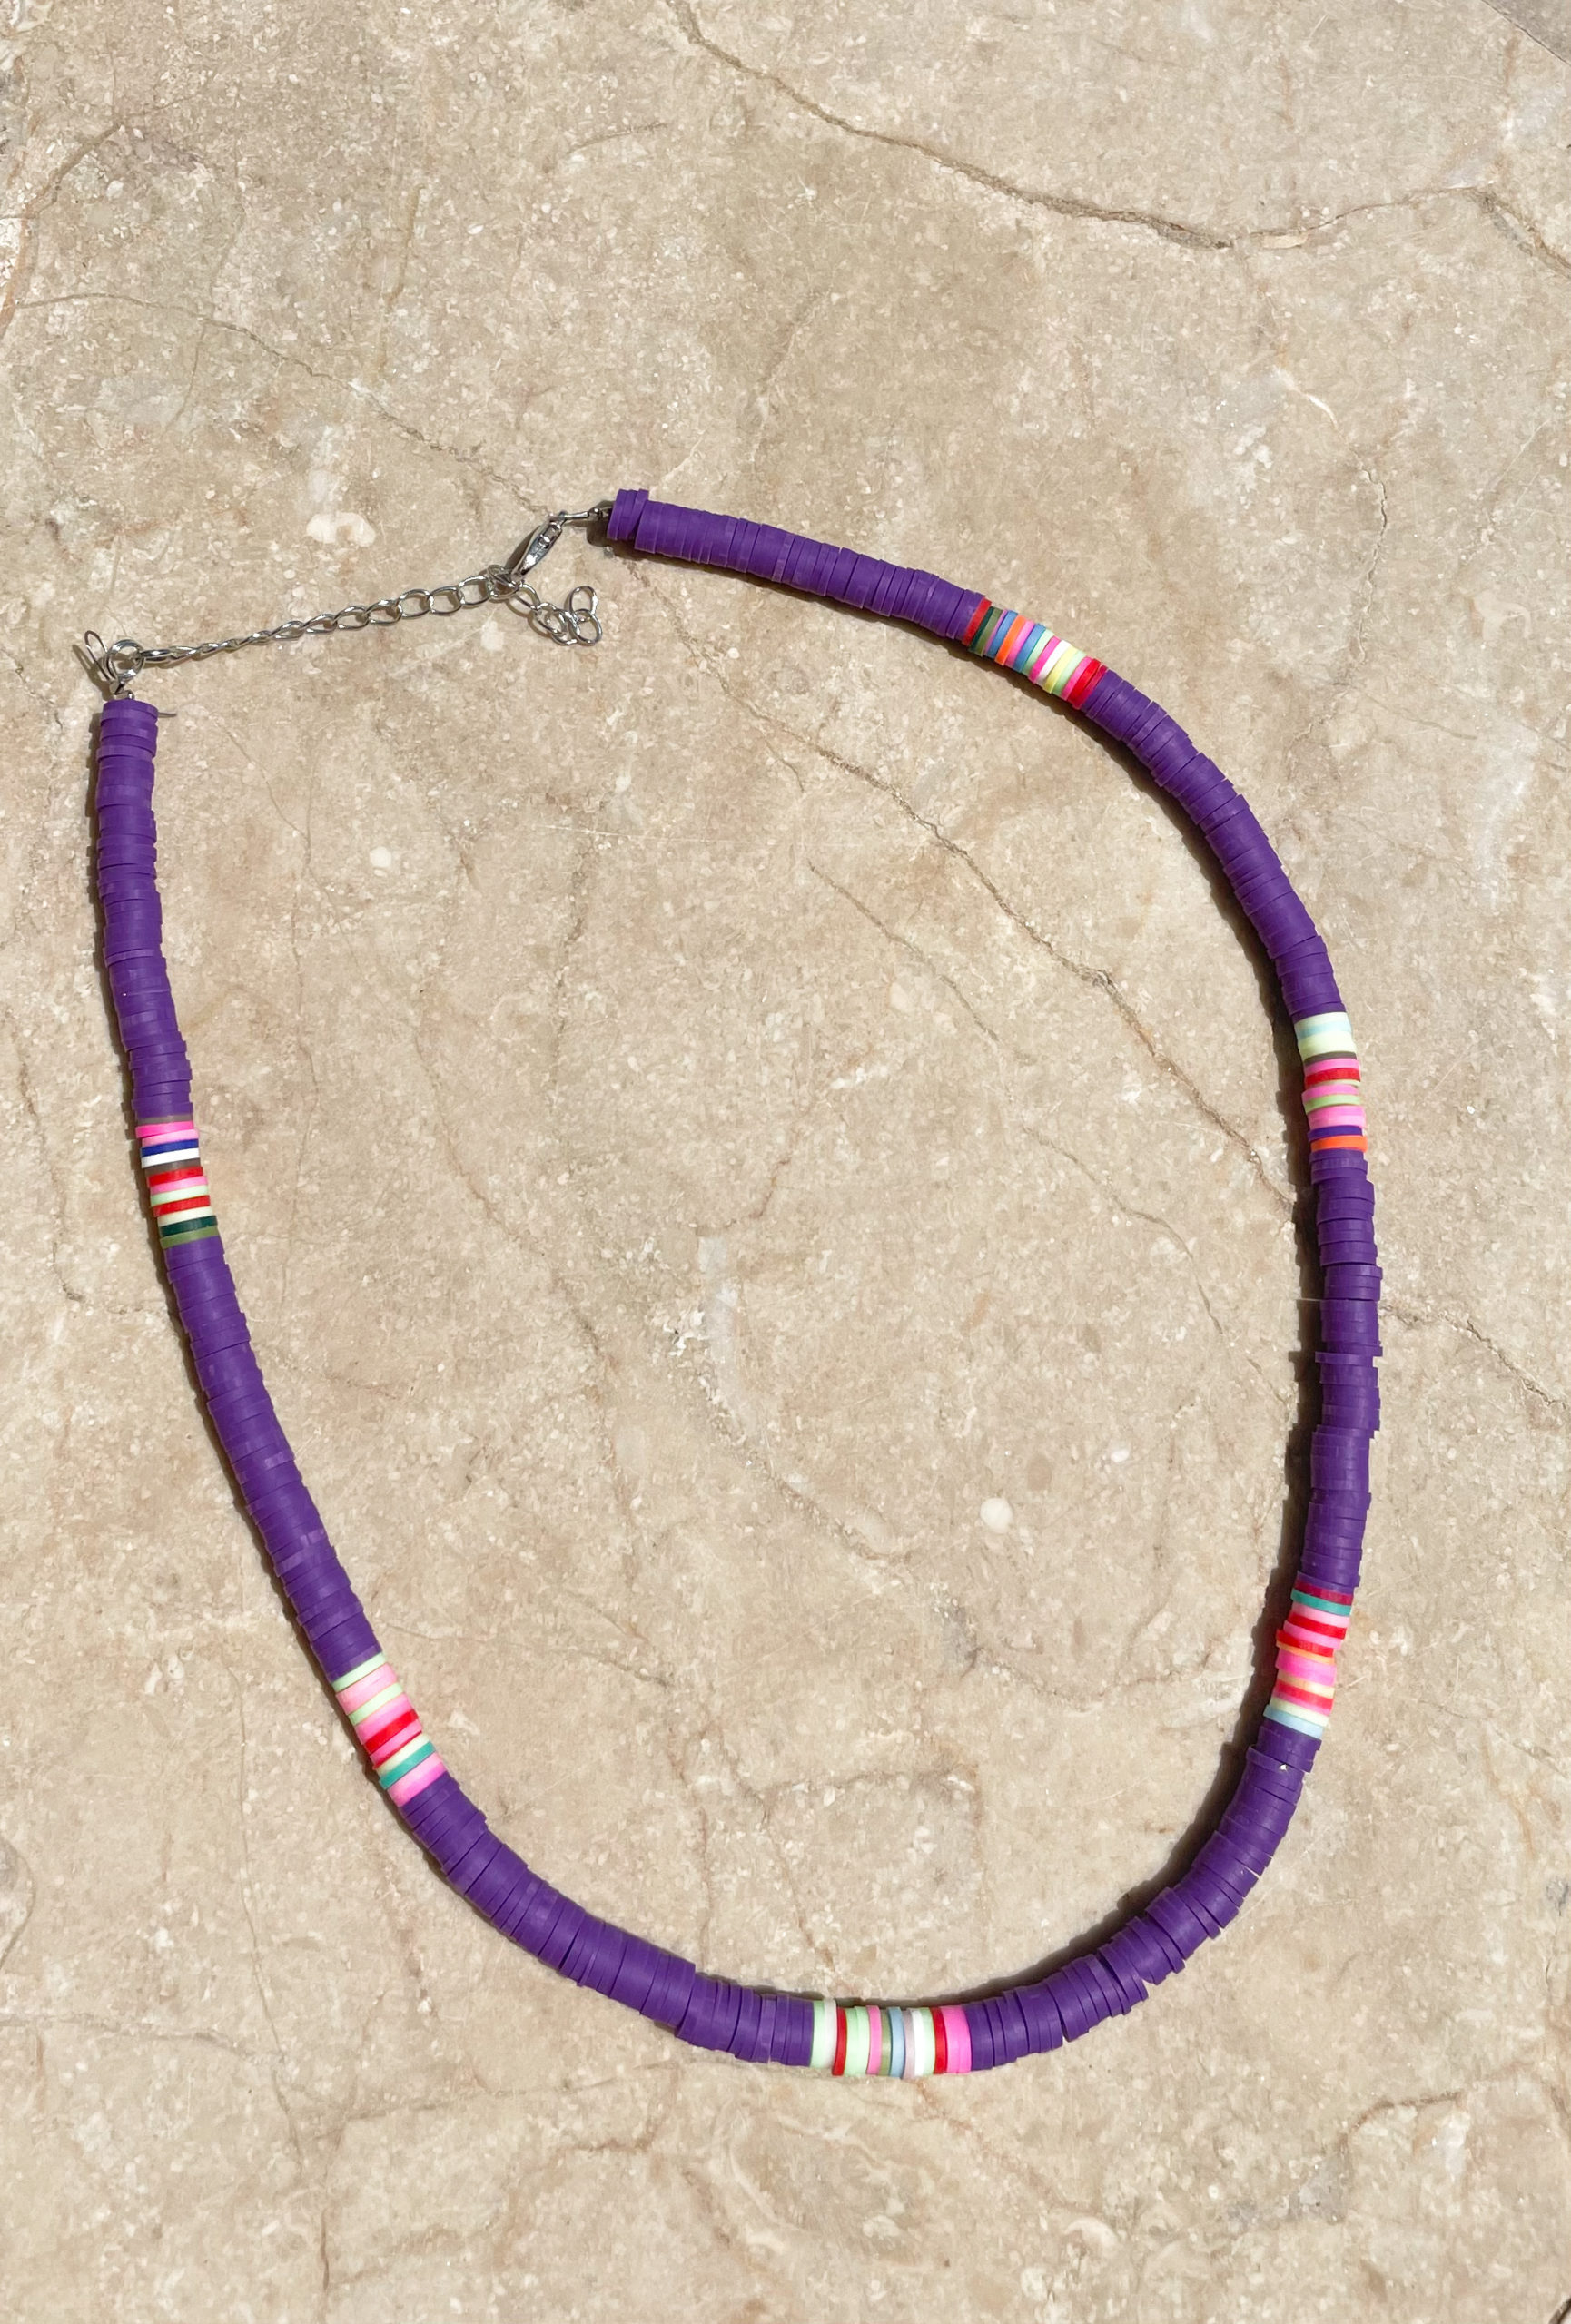 Lavender clay beads necklace